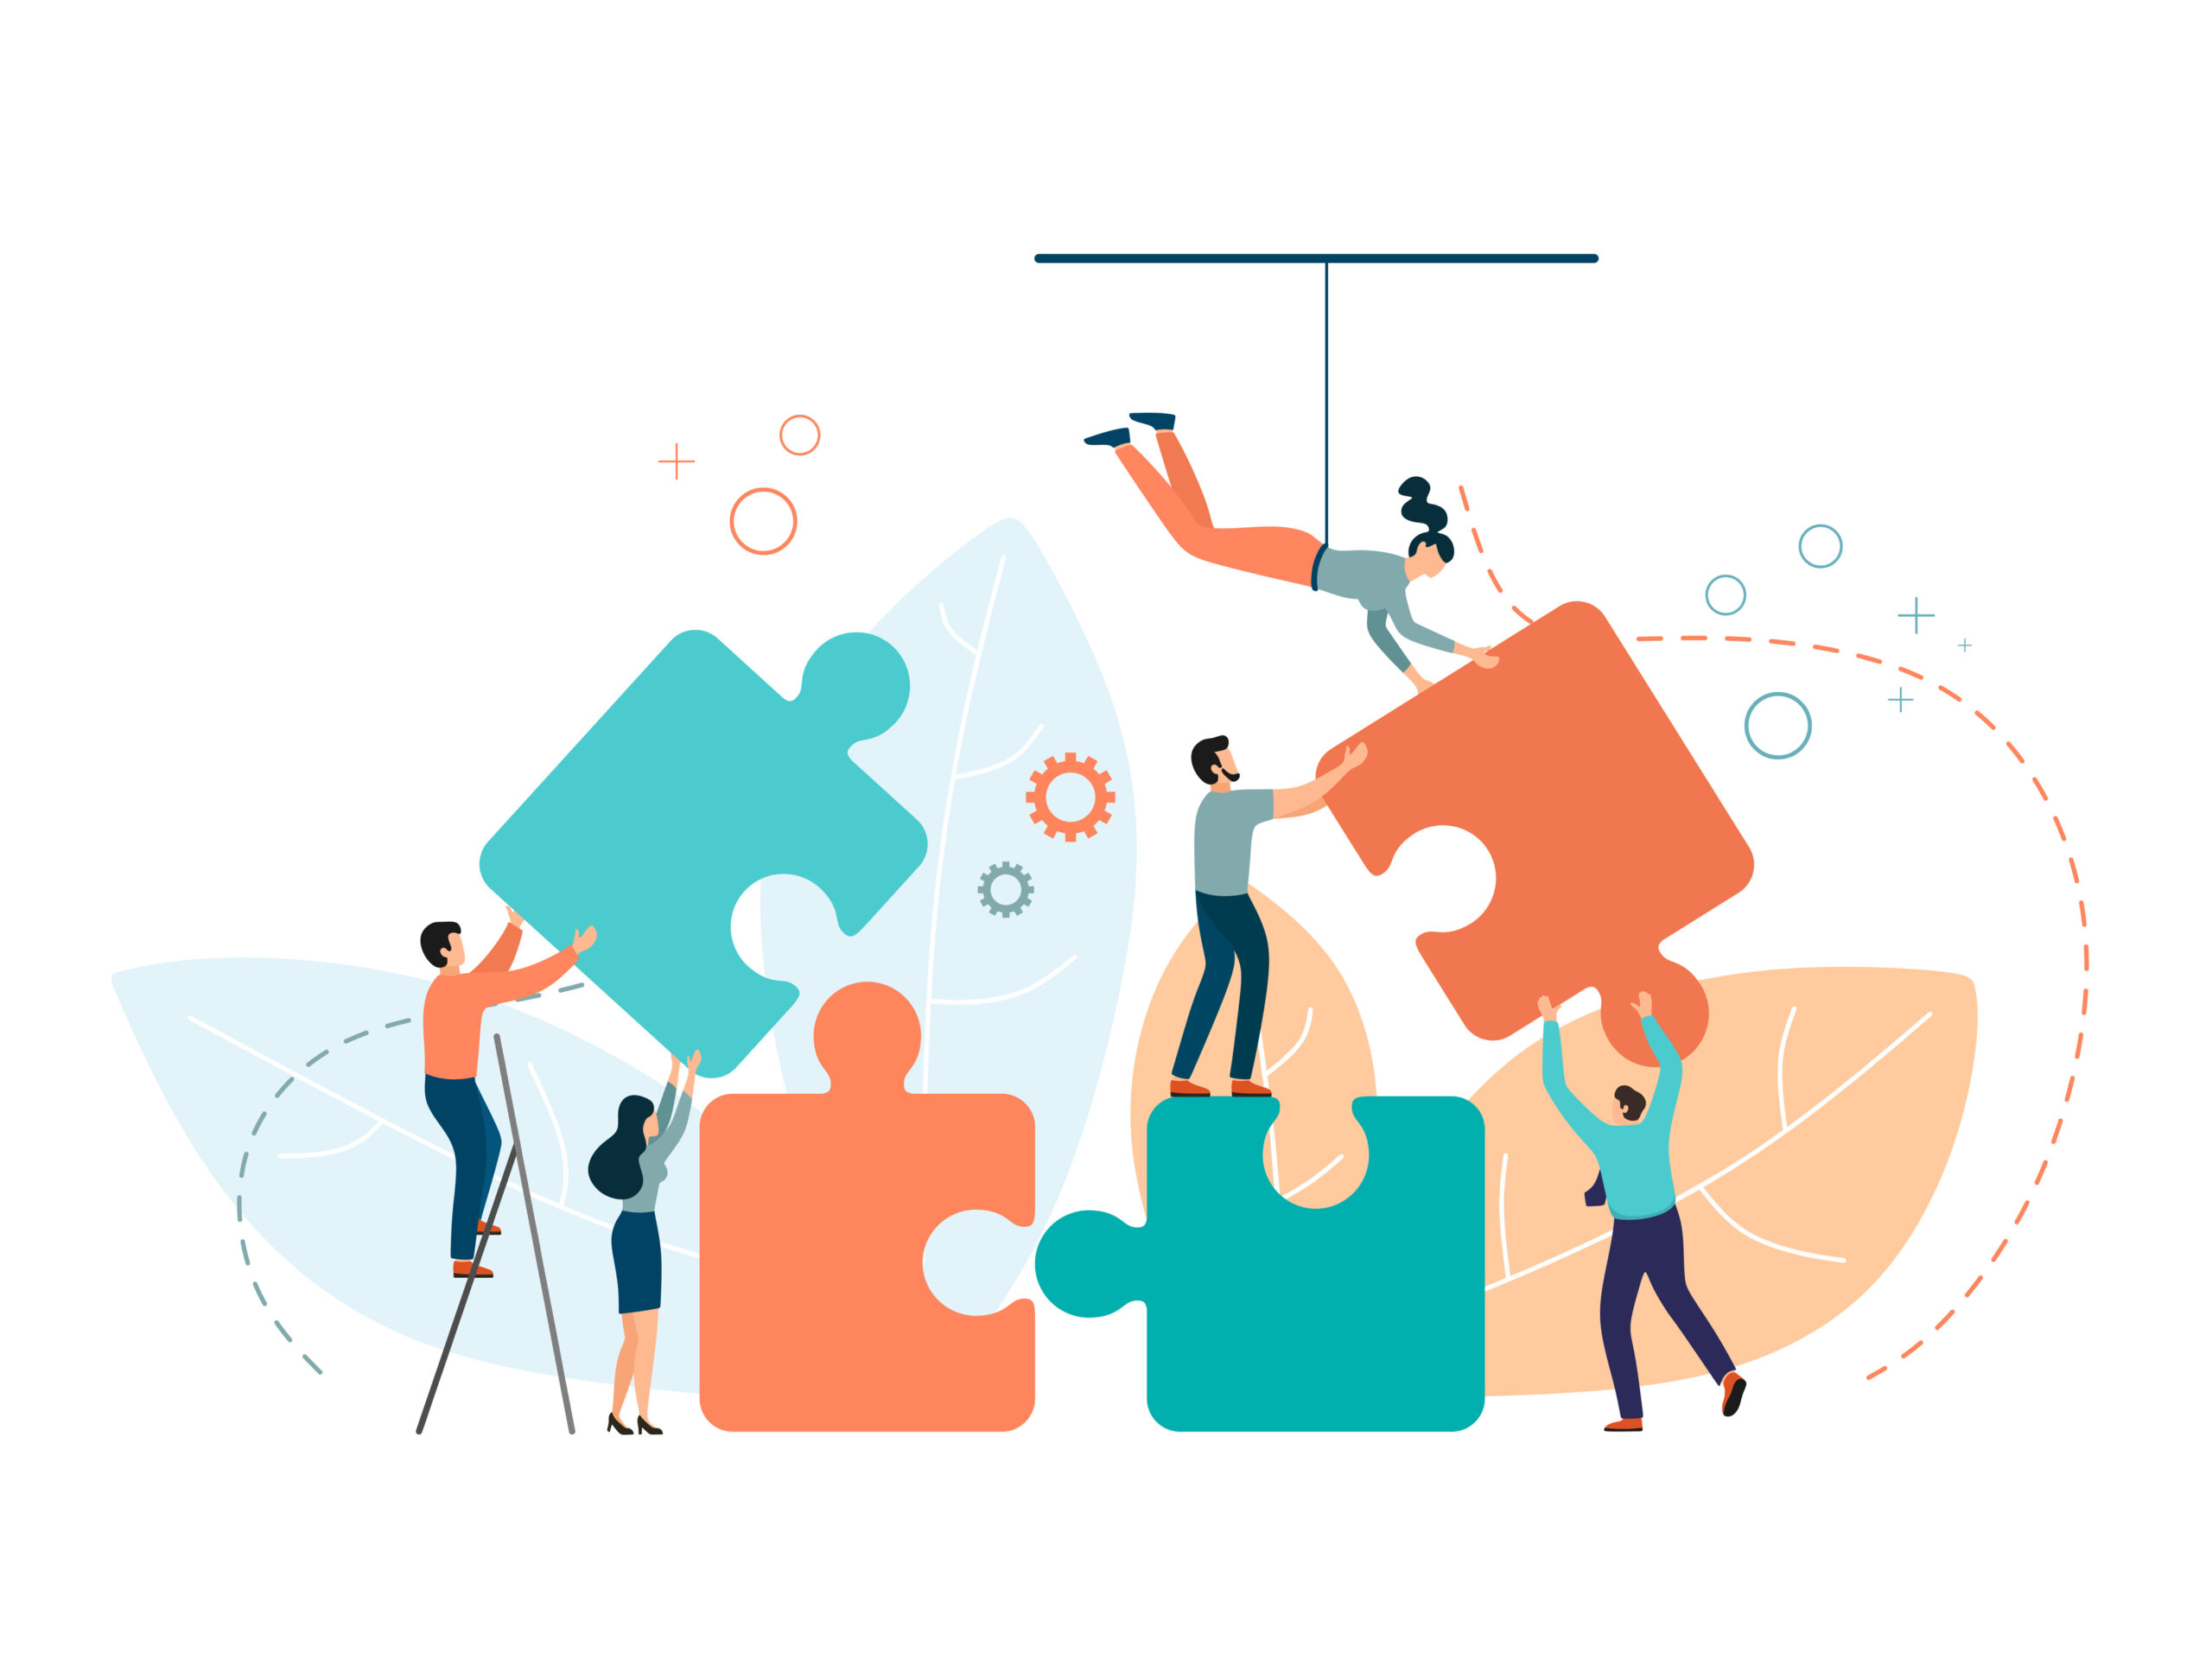 Improve user experience, Collaborative teamwork as people work together to piece together a puzzle, symbolizing unity, cooperation, and problem-solving.